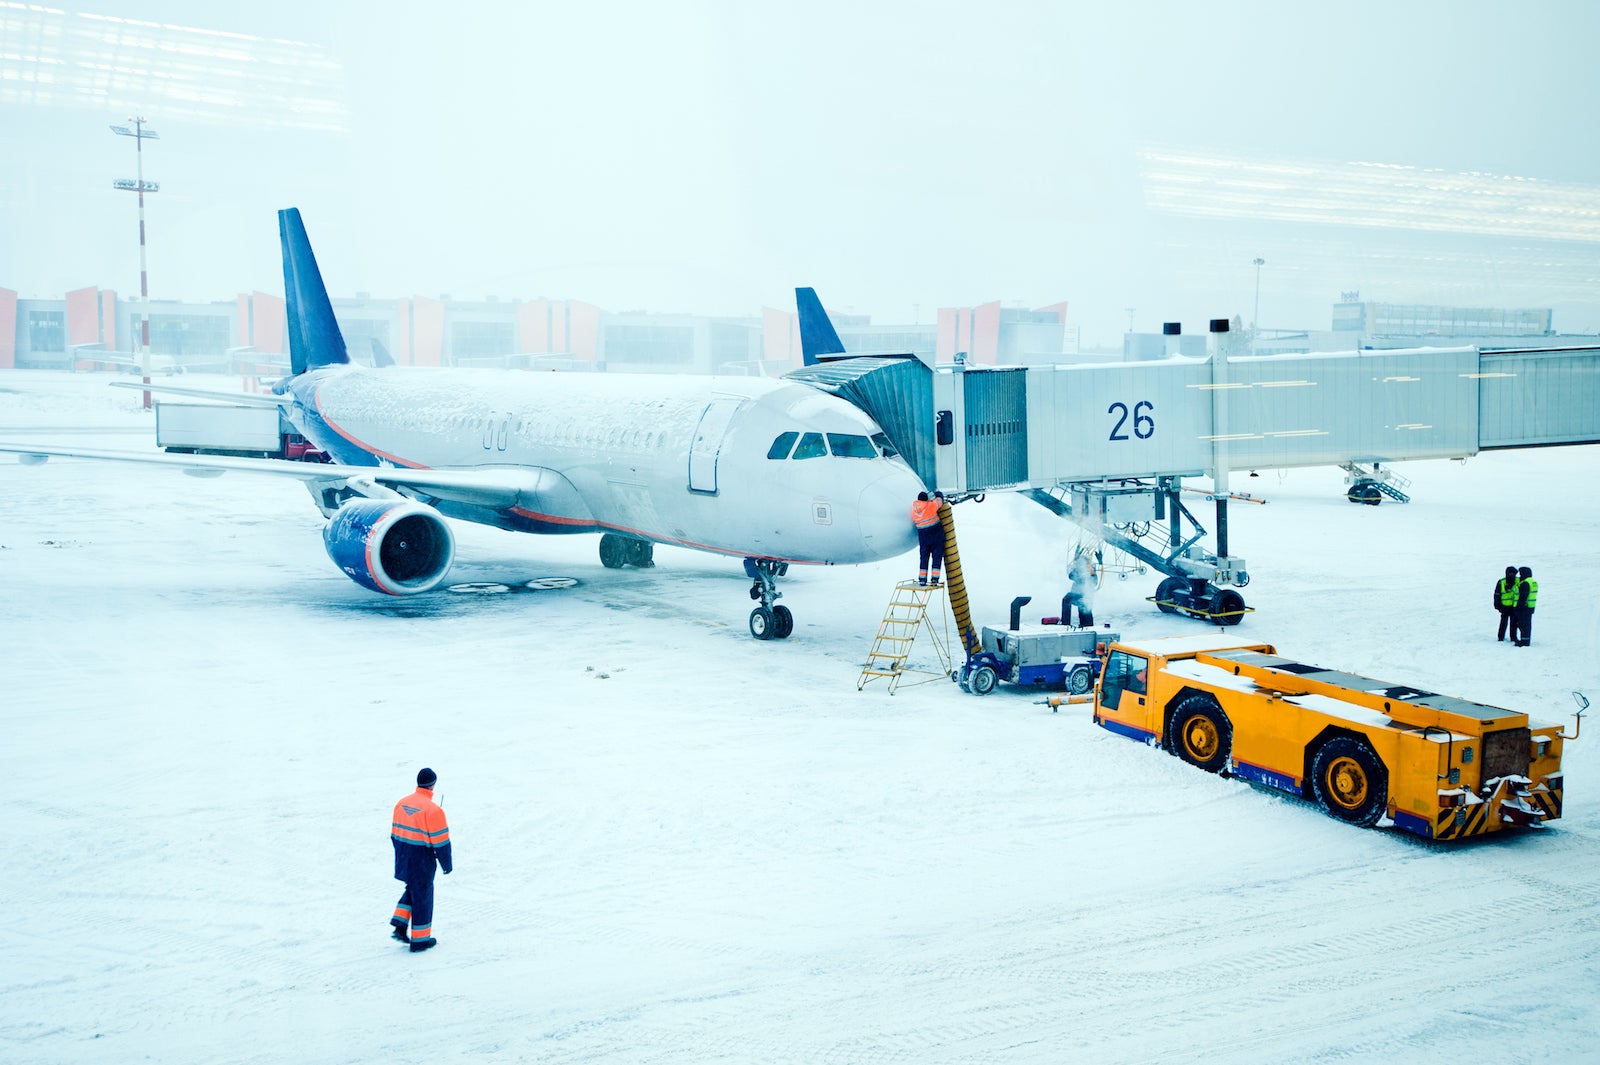 Airplane de-iced after snowstorm. (Photo by ArtMarie / Getty Images)